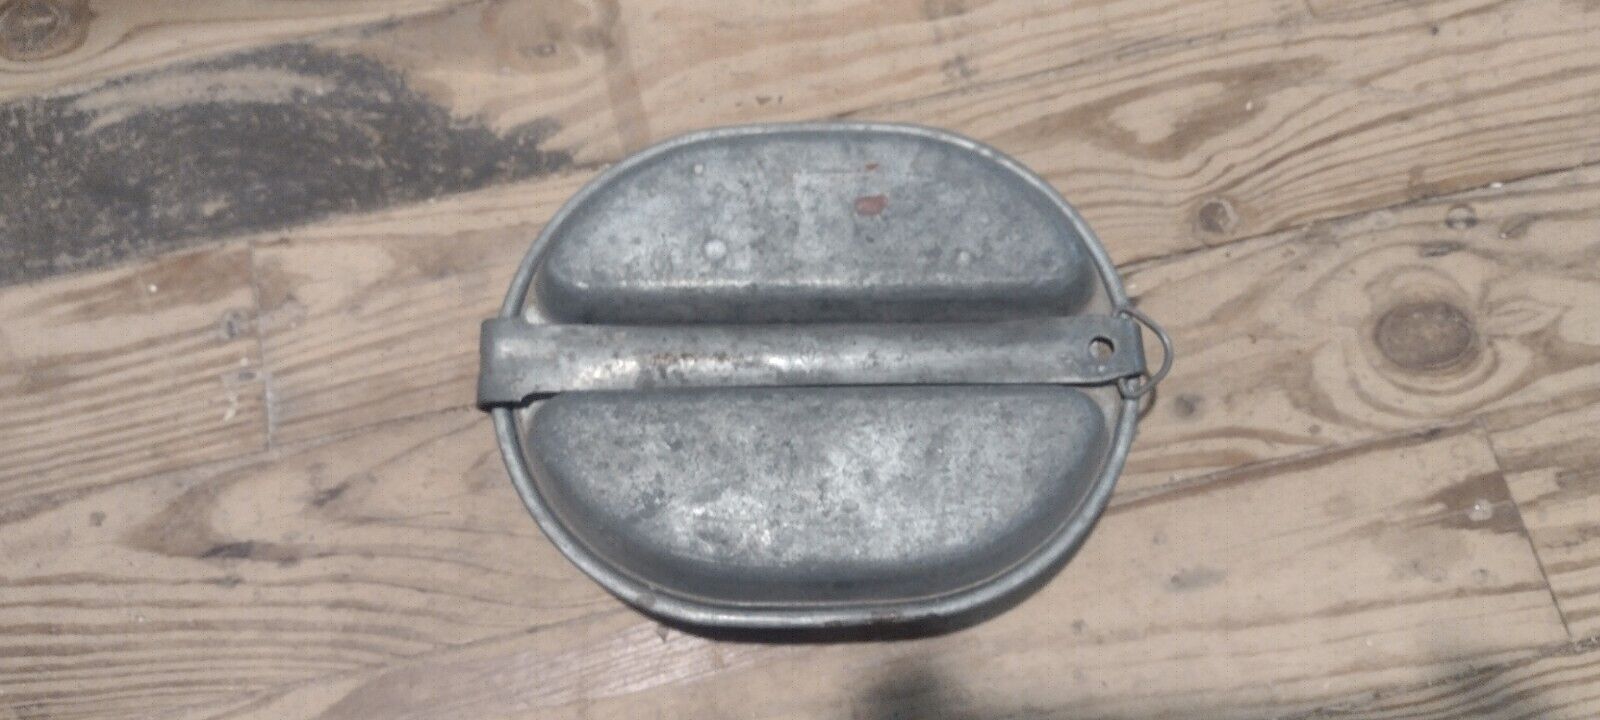 ORIGINAL WWII US ARMY 1942 MESS KIT, EARLY VERSION- OWENS-ILLINOIS, RARE MAKER